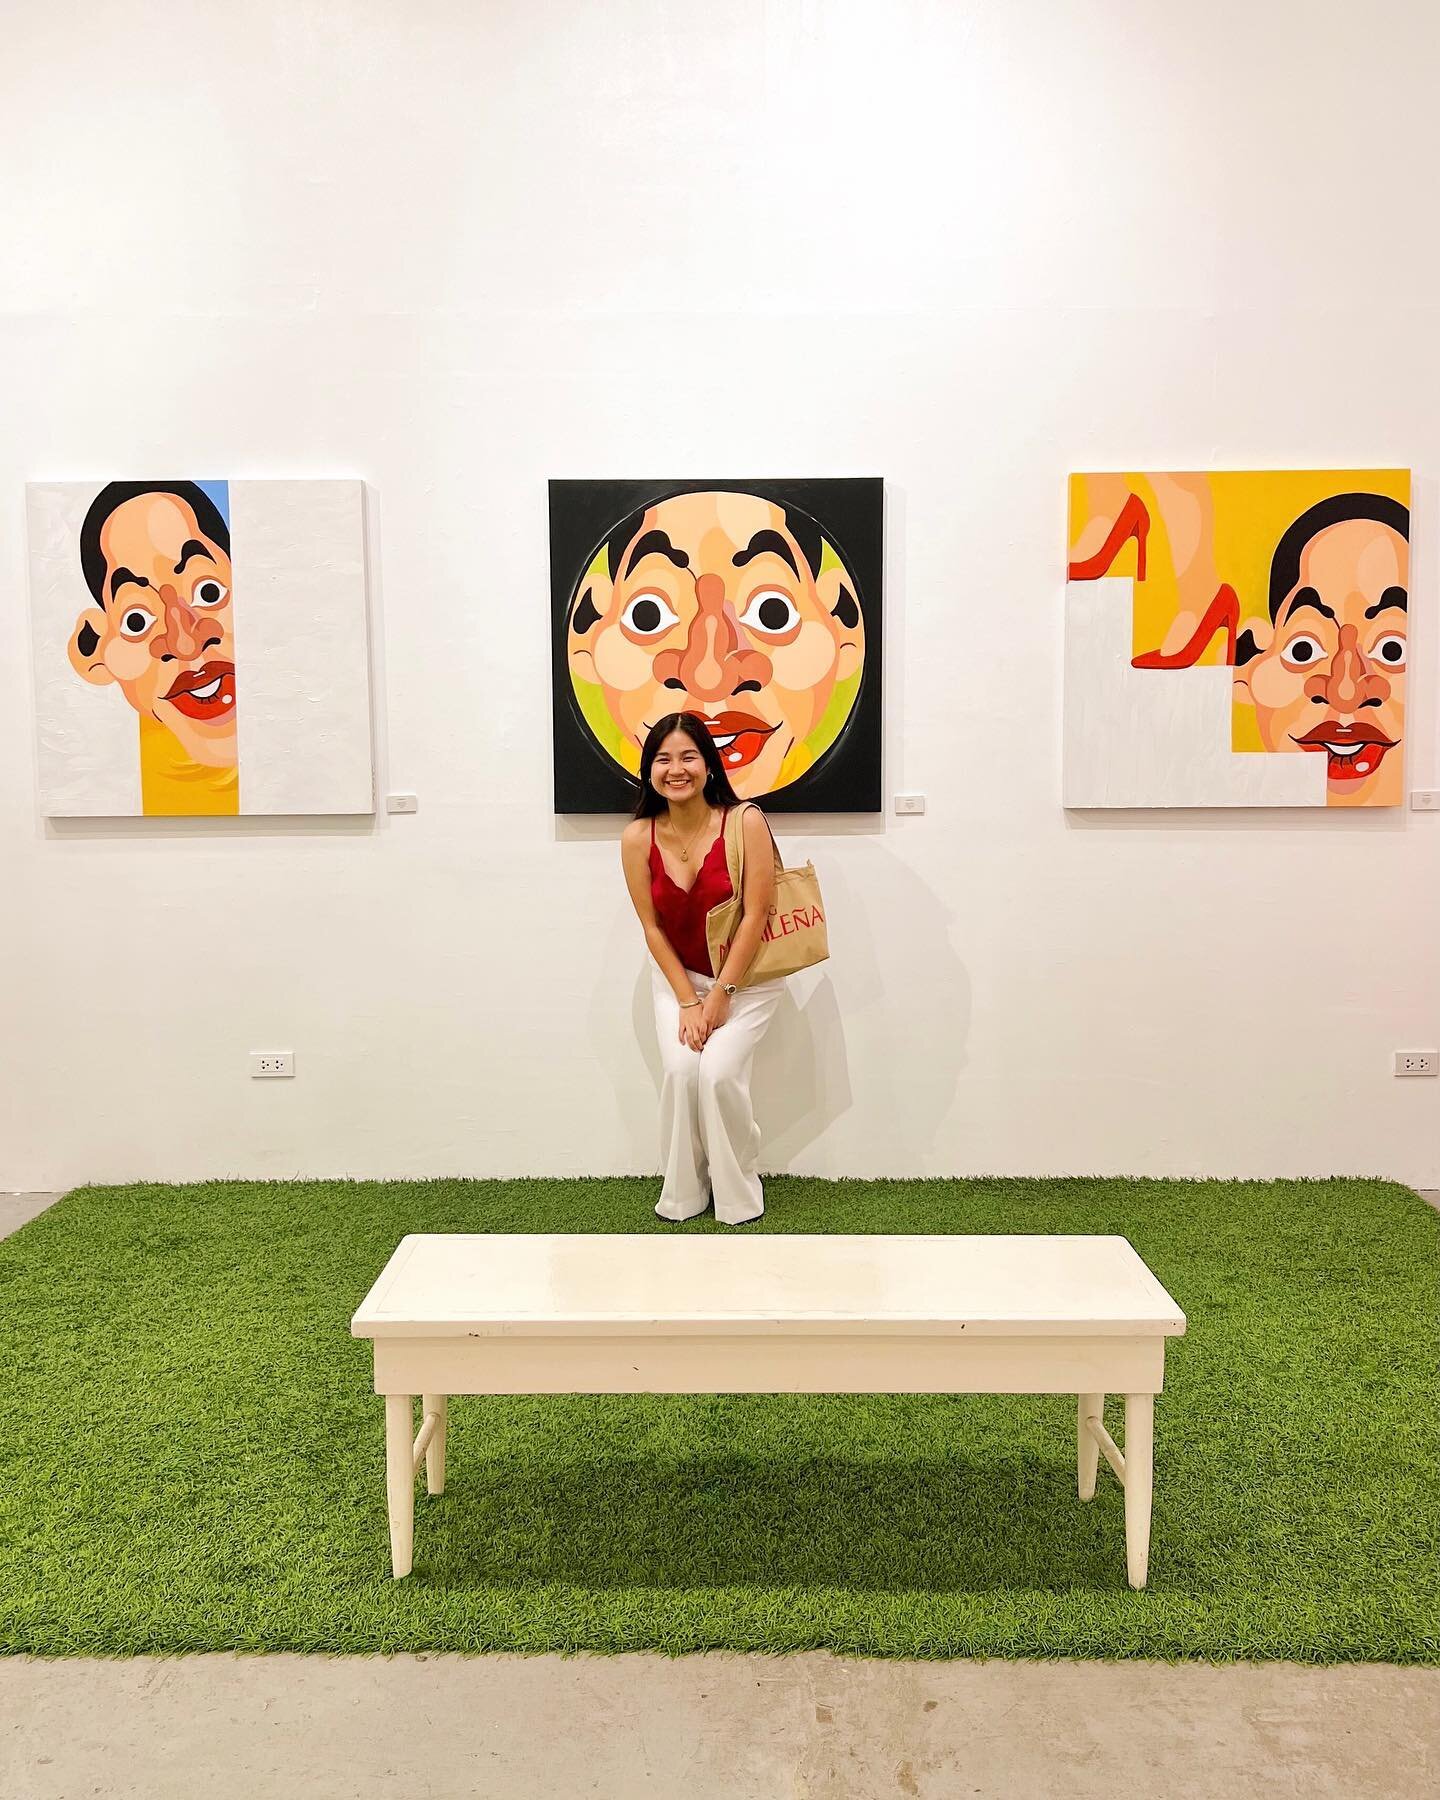 Peek-a-boo! It&rsquo;s me (and it&rsquo;s also the name of this series hehe) 🫣 Beyond grateful to everyone who came to last week&rsquo;s opening, @artjstudio and @df_artagency !!! 💖💖💖

&ldquo;Dainty Diversions&rdquo; runs until February 4, 2023 ✨